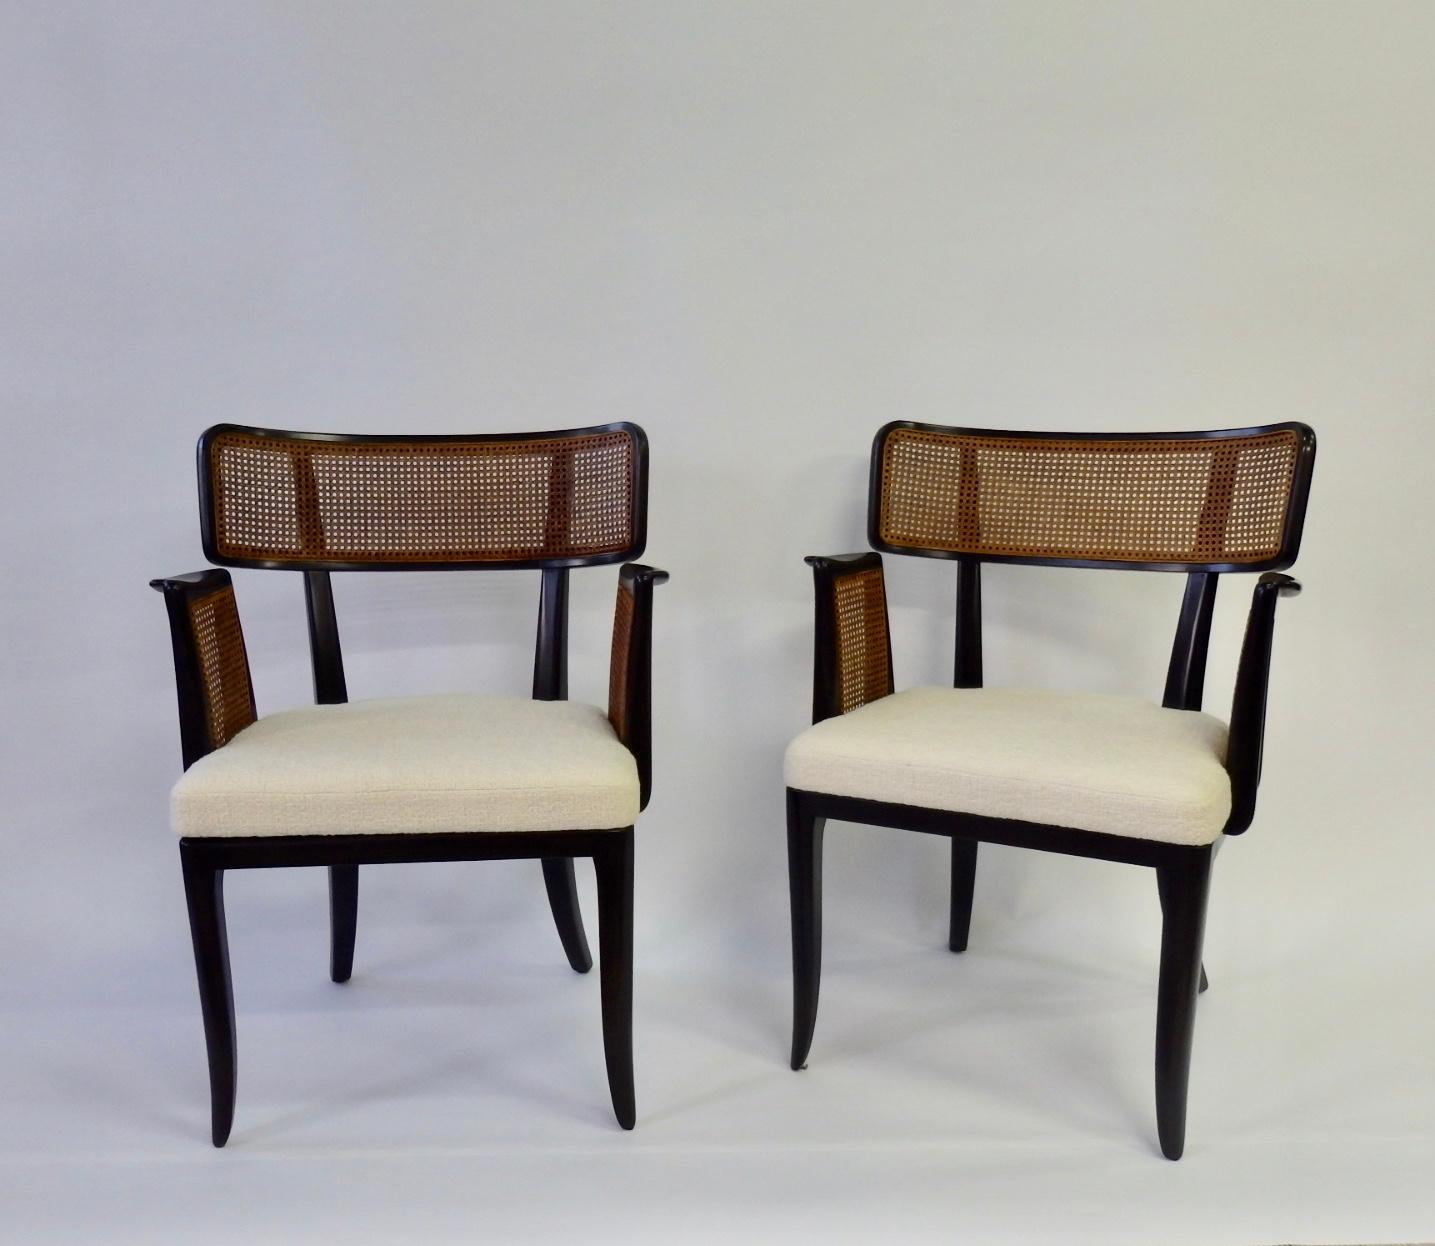 Nicely restored Edward Wormley for Dunbar side chairs. Caned backrest and caned arms. Frames nicely refinished and seat re upholstered in white bouclé textile.